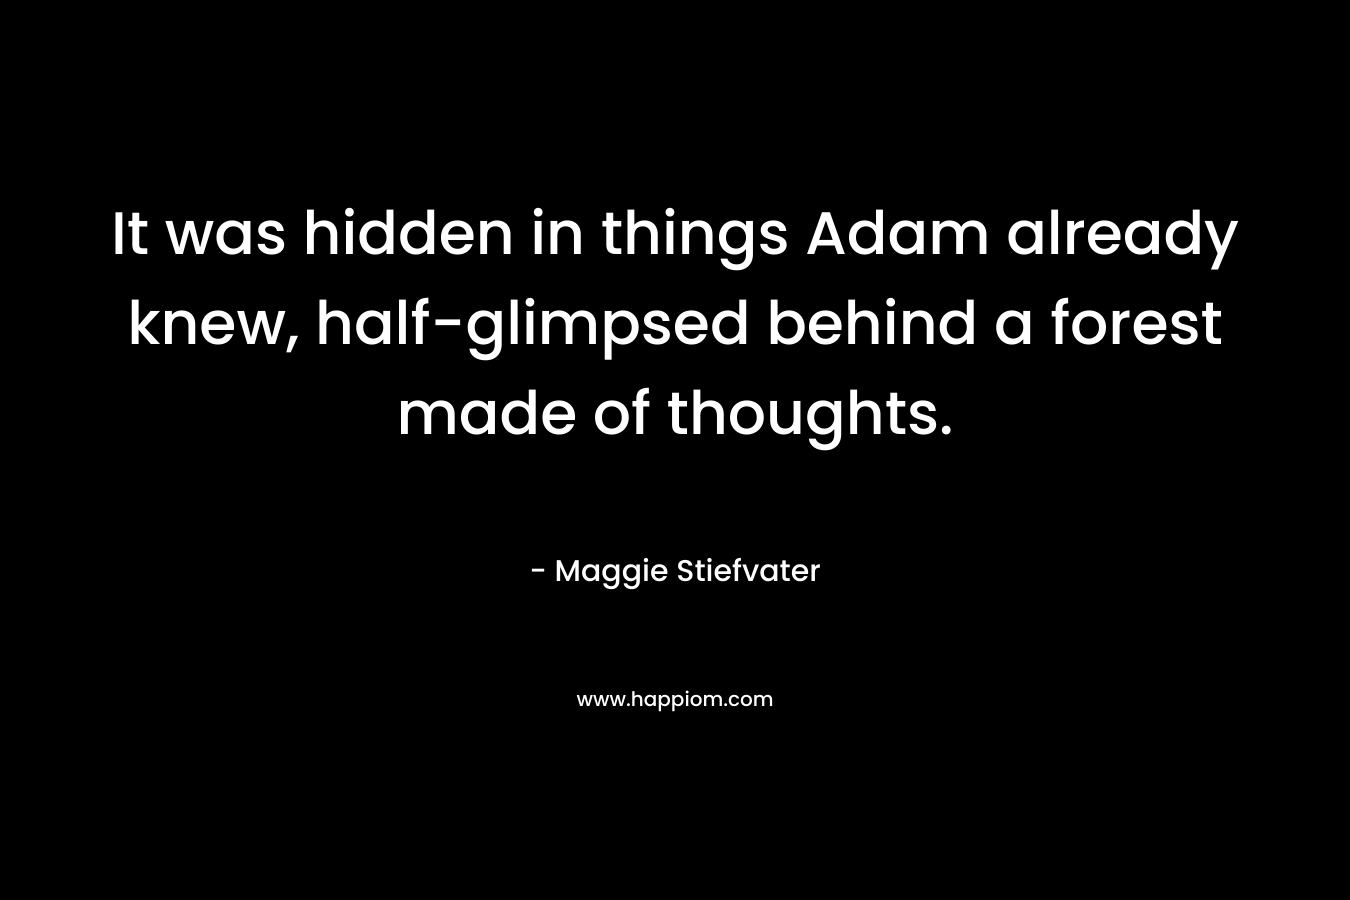 It was hidden in things Adam already knew, half-glimpsed behind a forest made of thoughts. – Maggie Stiefvater